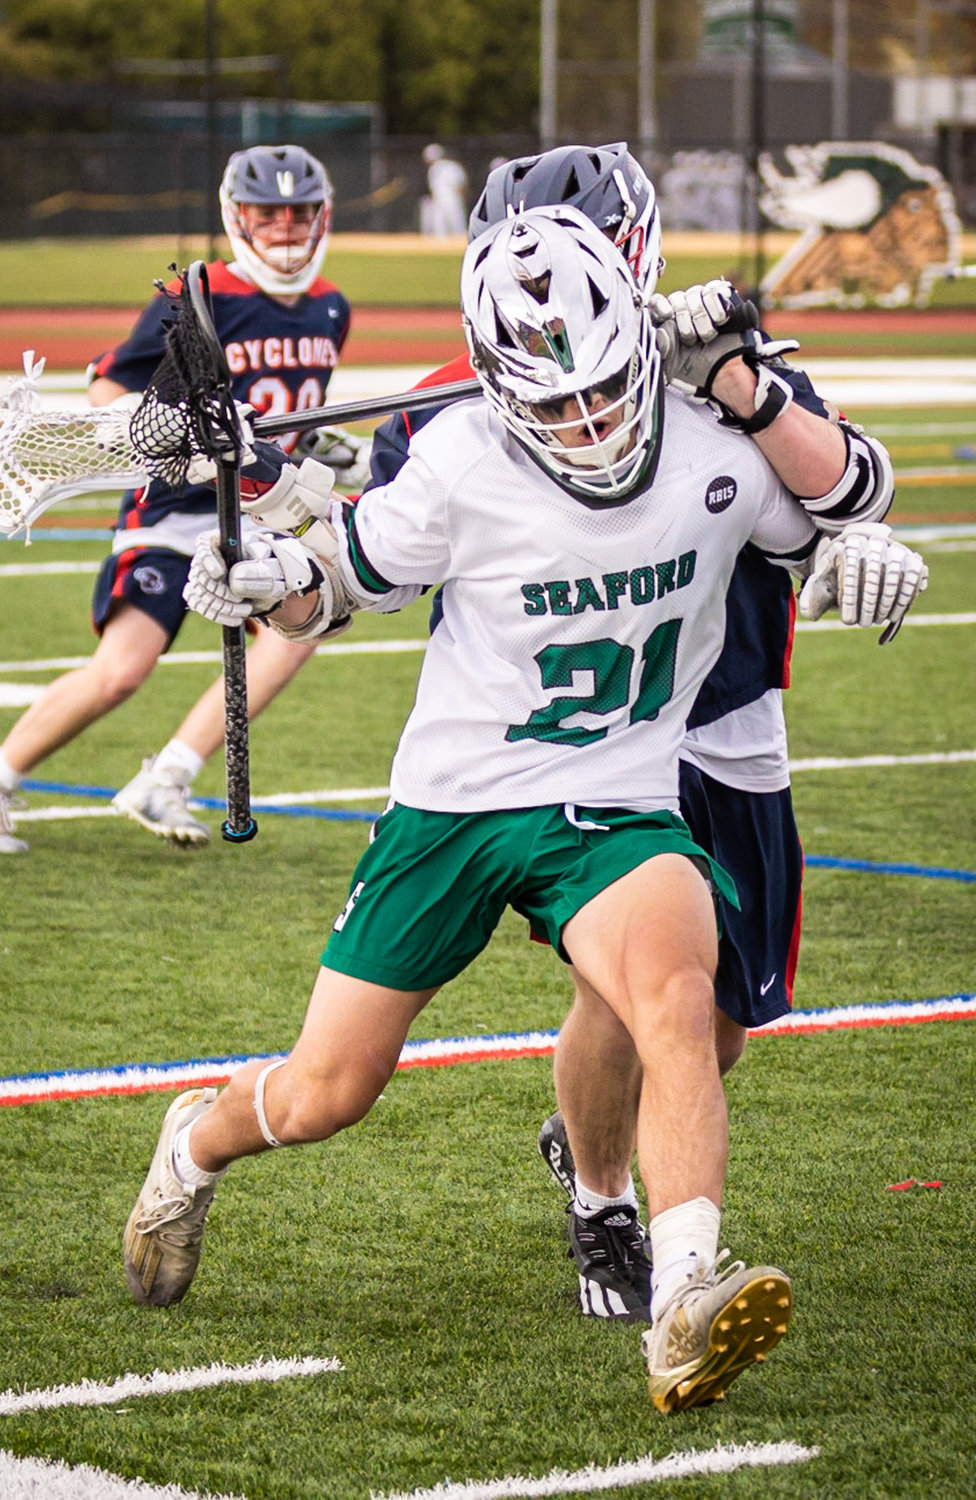 Senior John Raucci scored twice, including a highlight-reel goal late in the fourth quarter, in Seaford’s 7-5 win over South Side May 10.